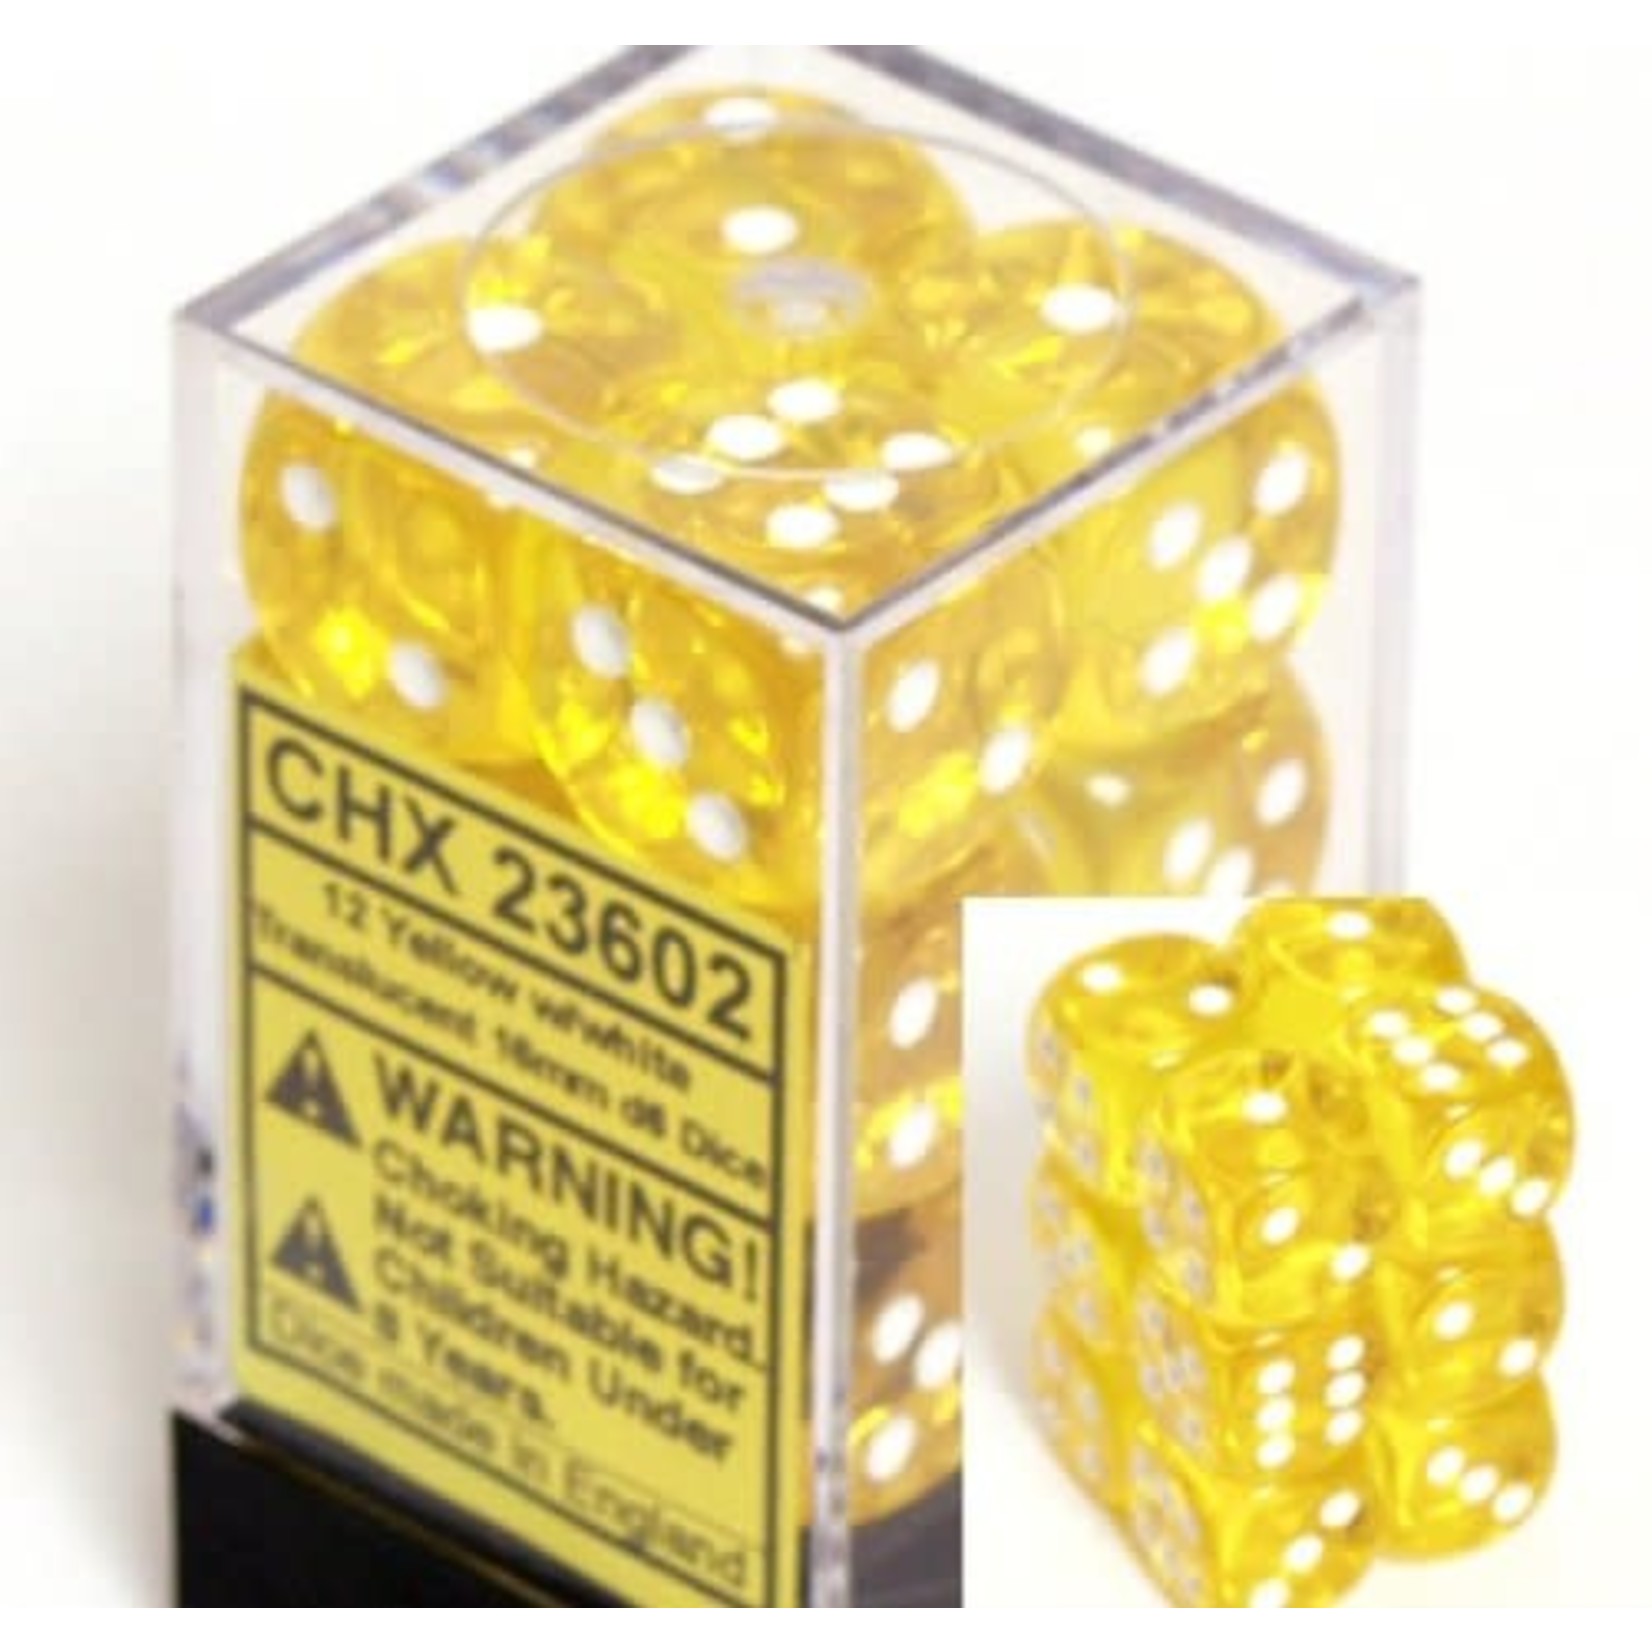 Chessex Translucent 16mm d6 Yellow white 12 dice